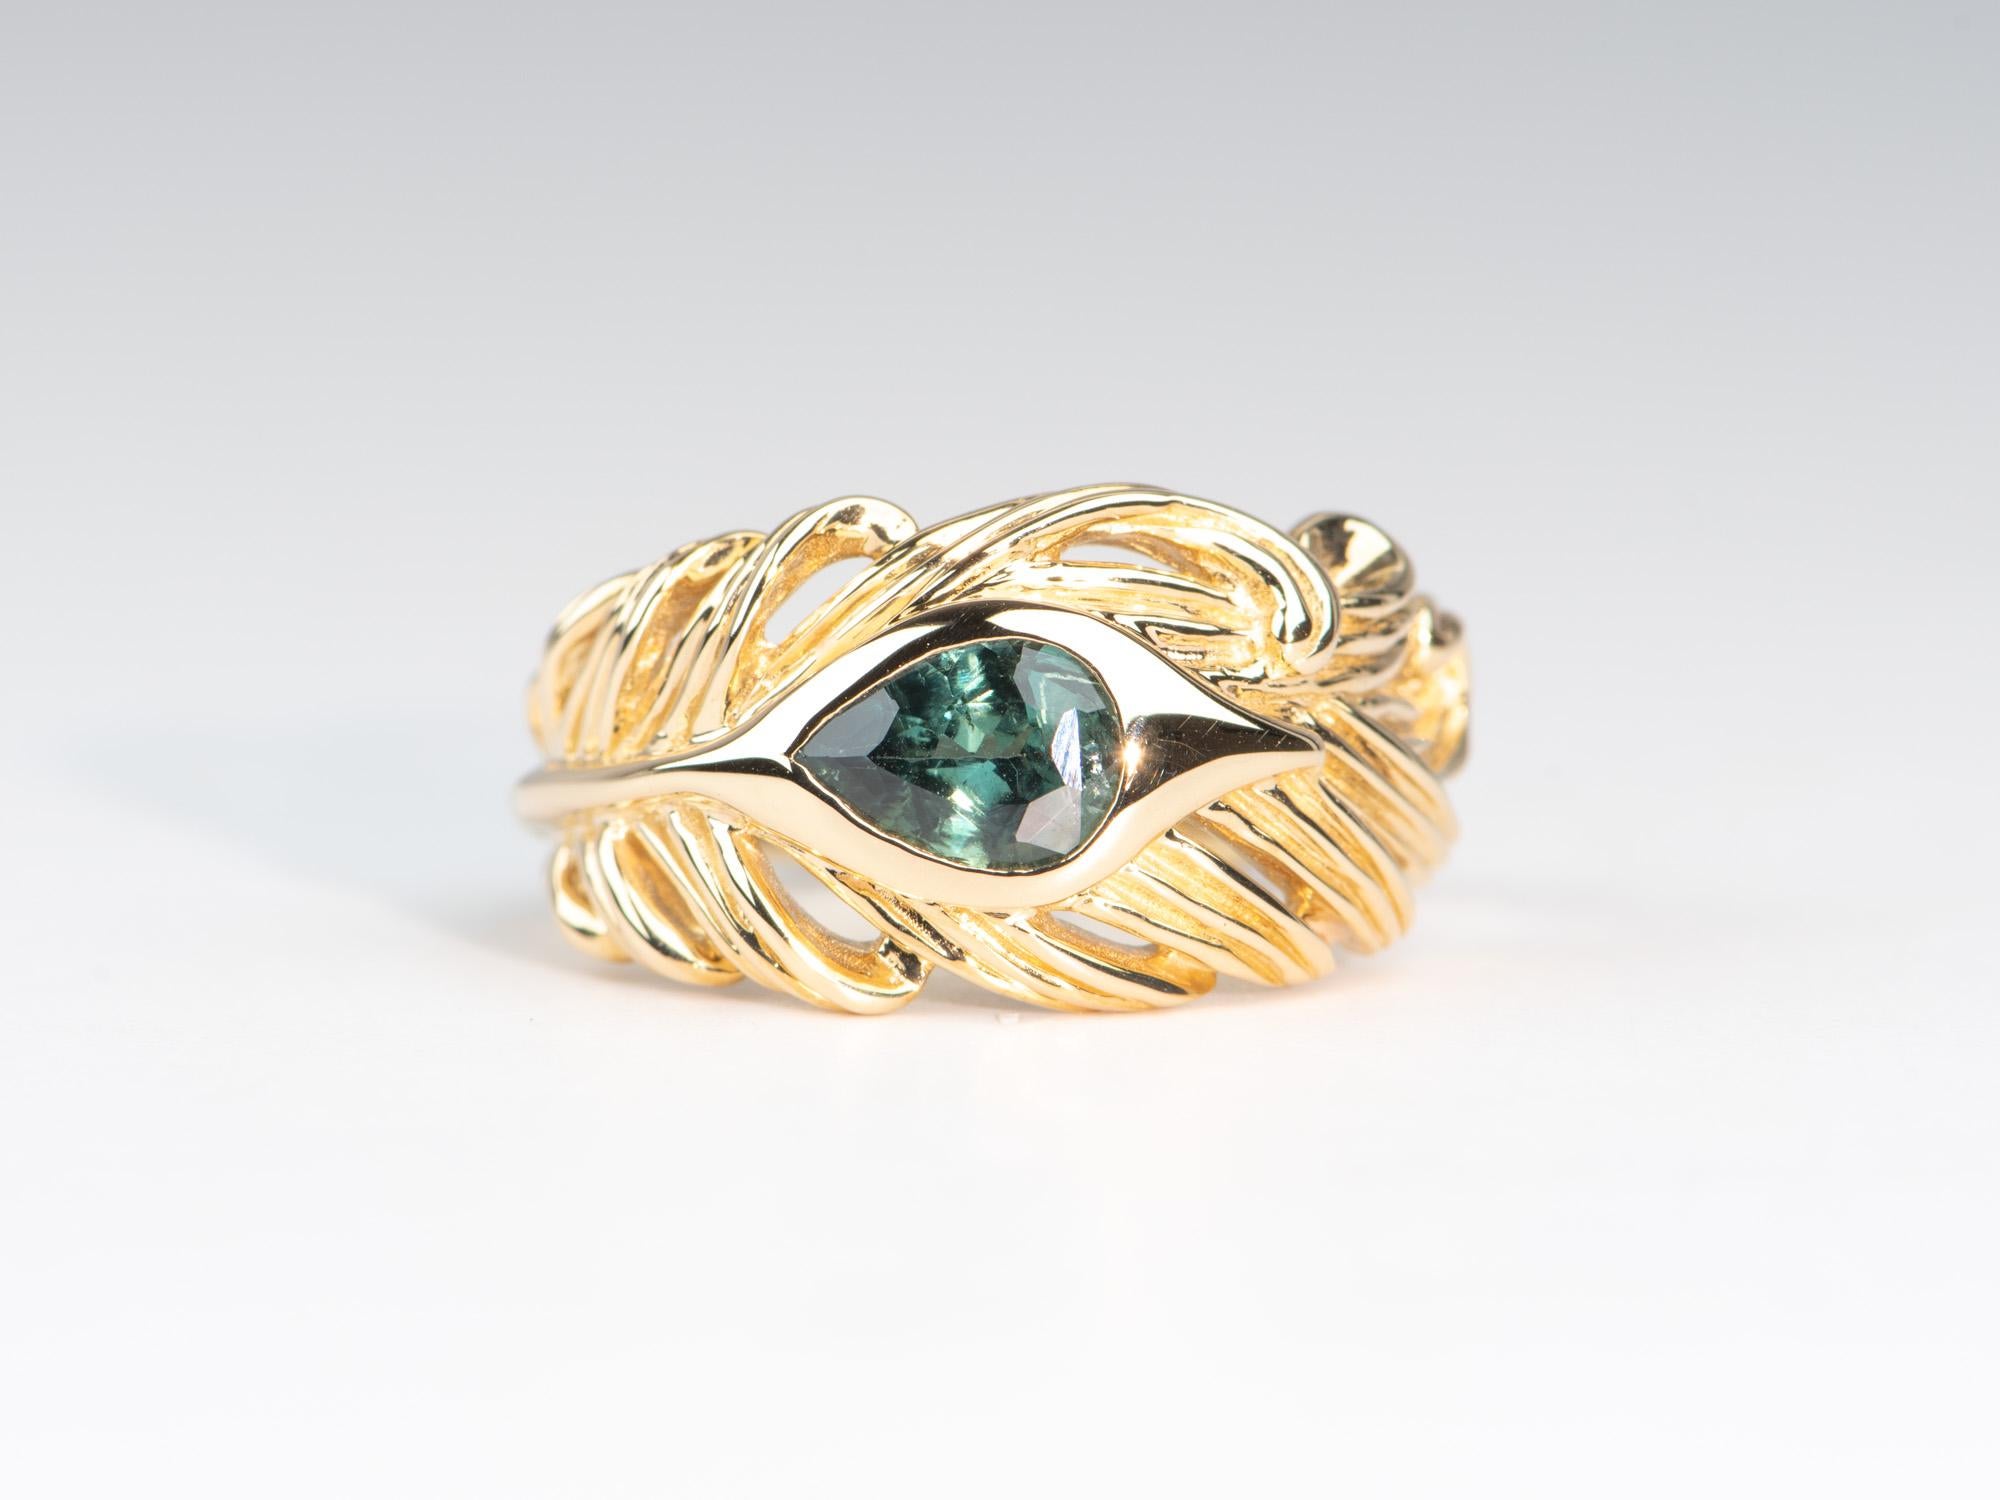 ♥ This is a beautiful peacock feather ring made from an artfully hand-carved wax model, set with a stunning peacock green sapphire
♥ Truly a one-of-a-kind ring for that unique person in yourself!
♥ The item measures 12mm in width at the widest part,